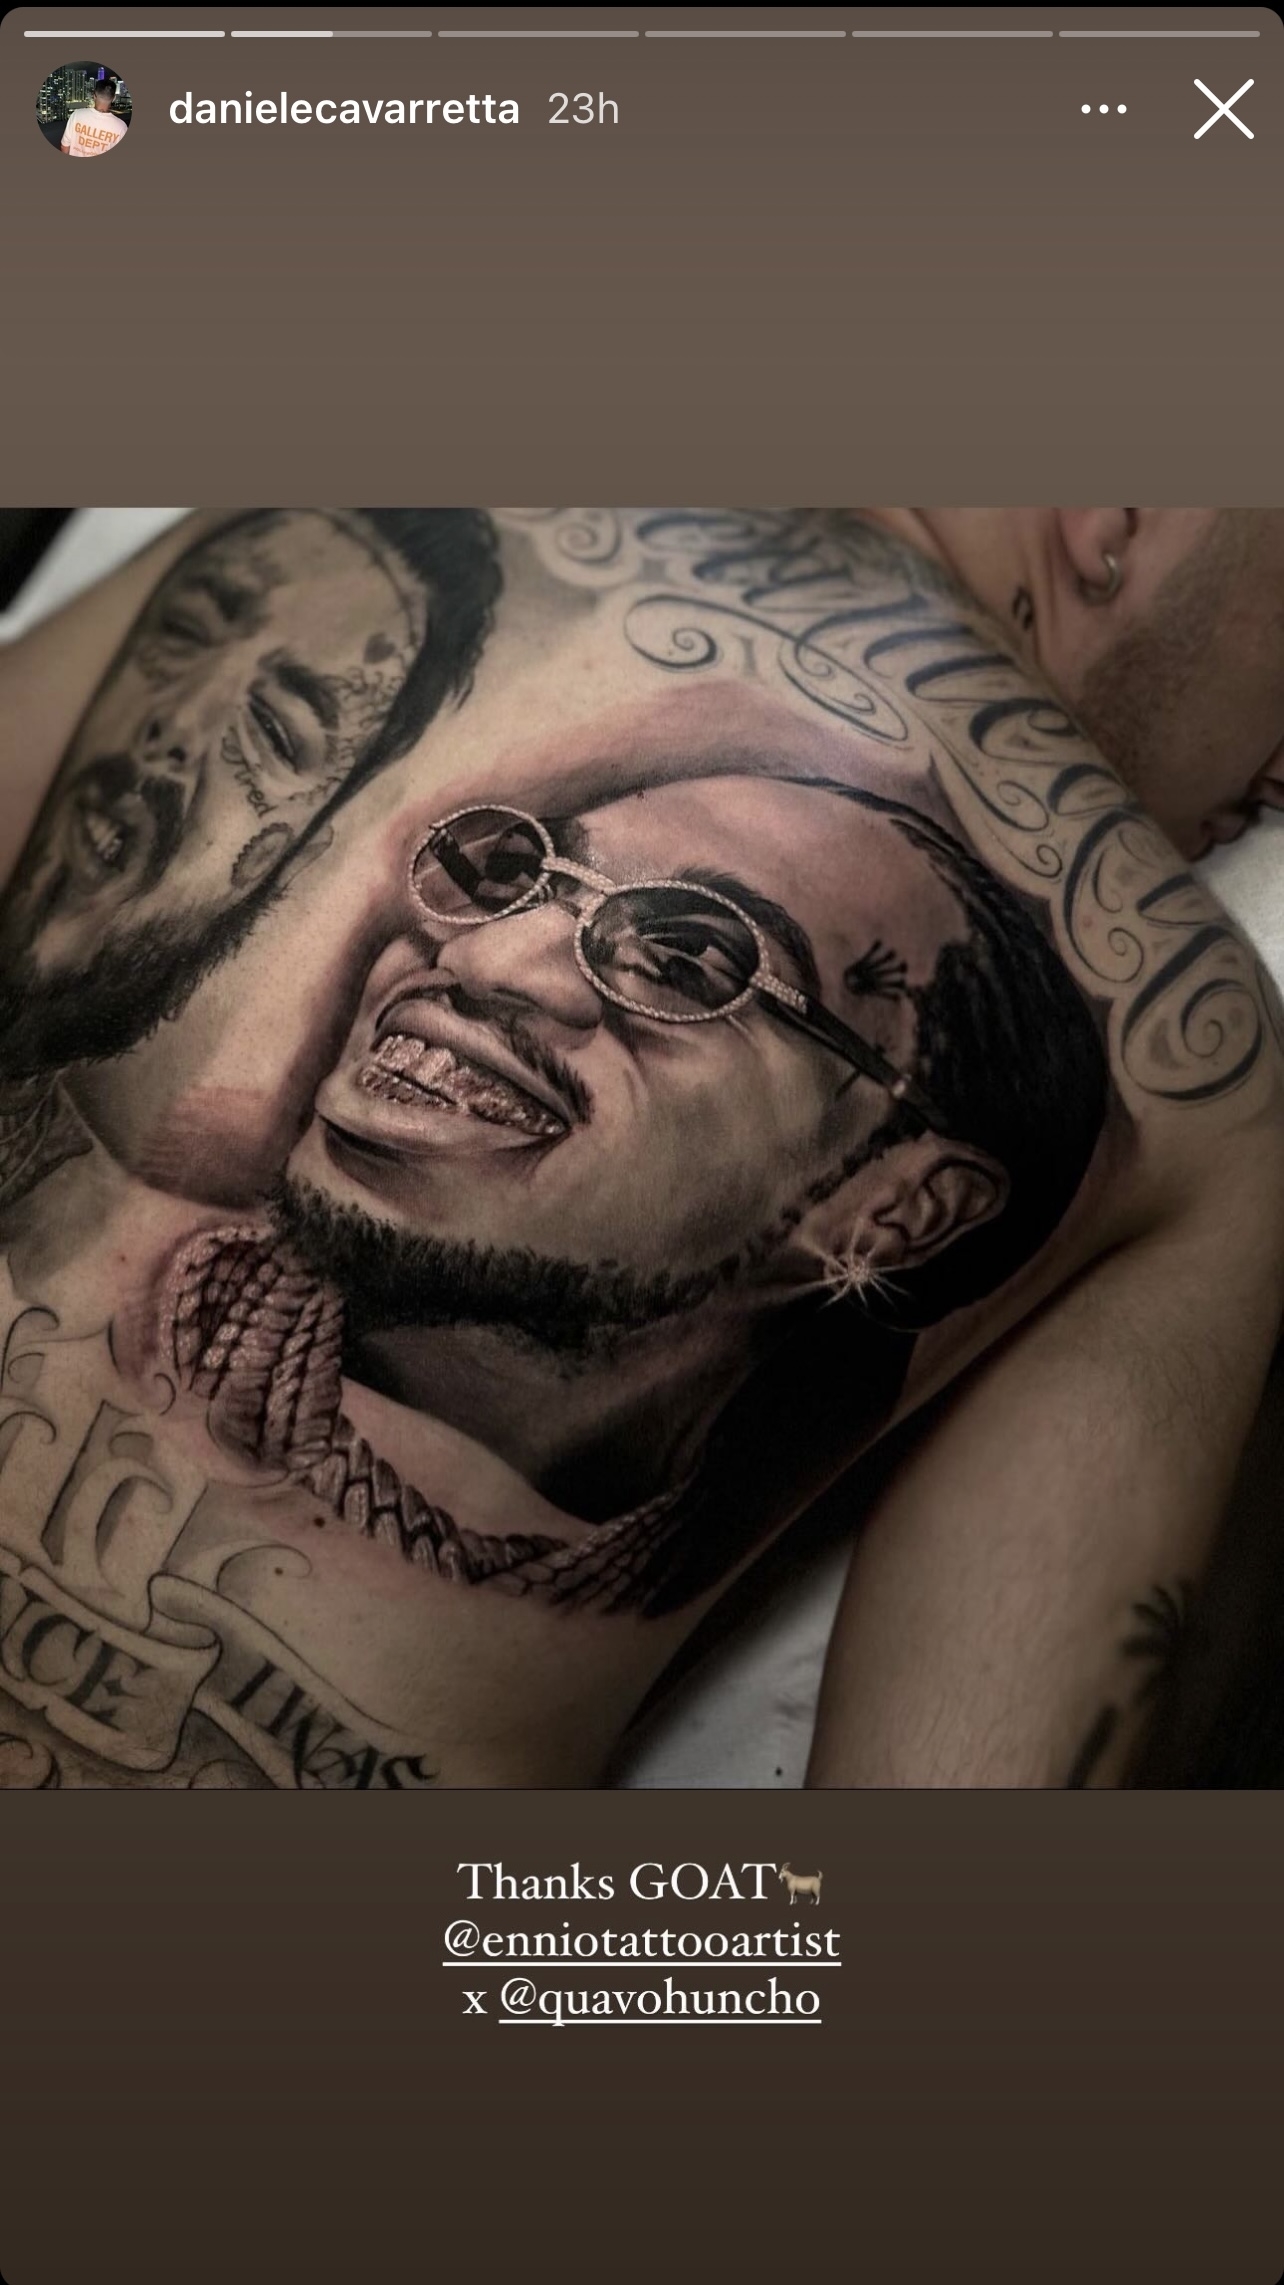 Man with a tattoo of Post Malone and Quavo on his back, including facial details and glasses.